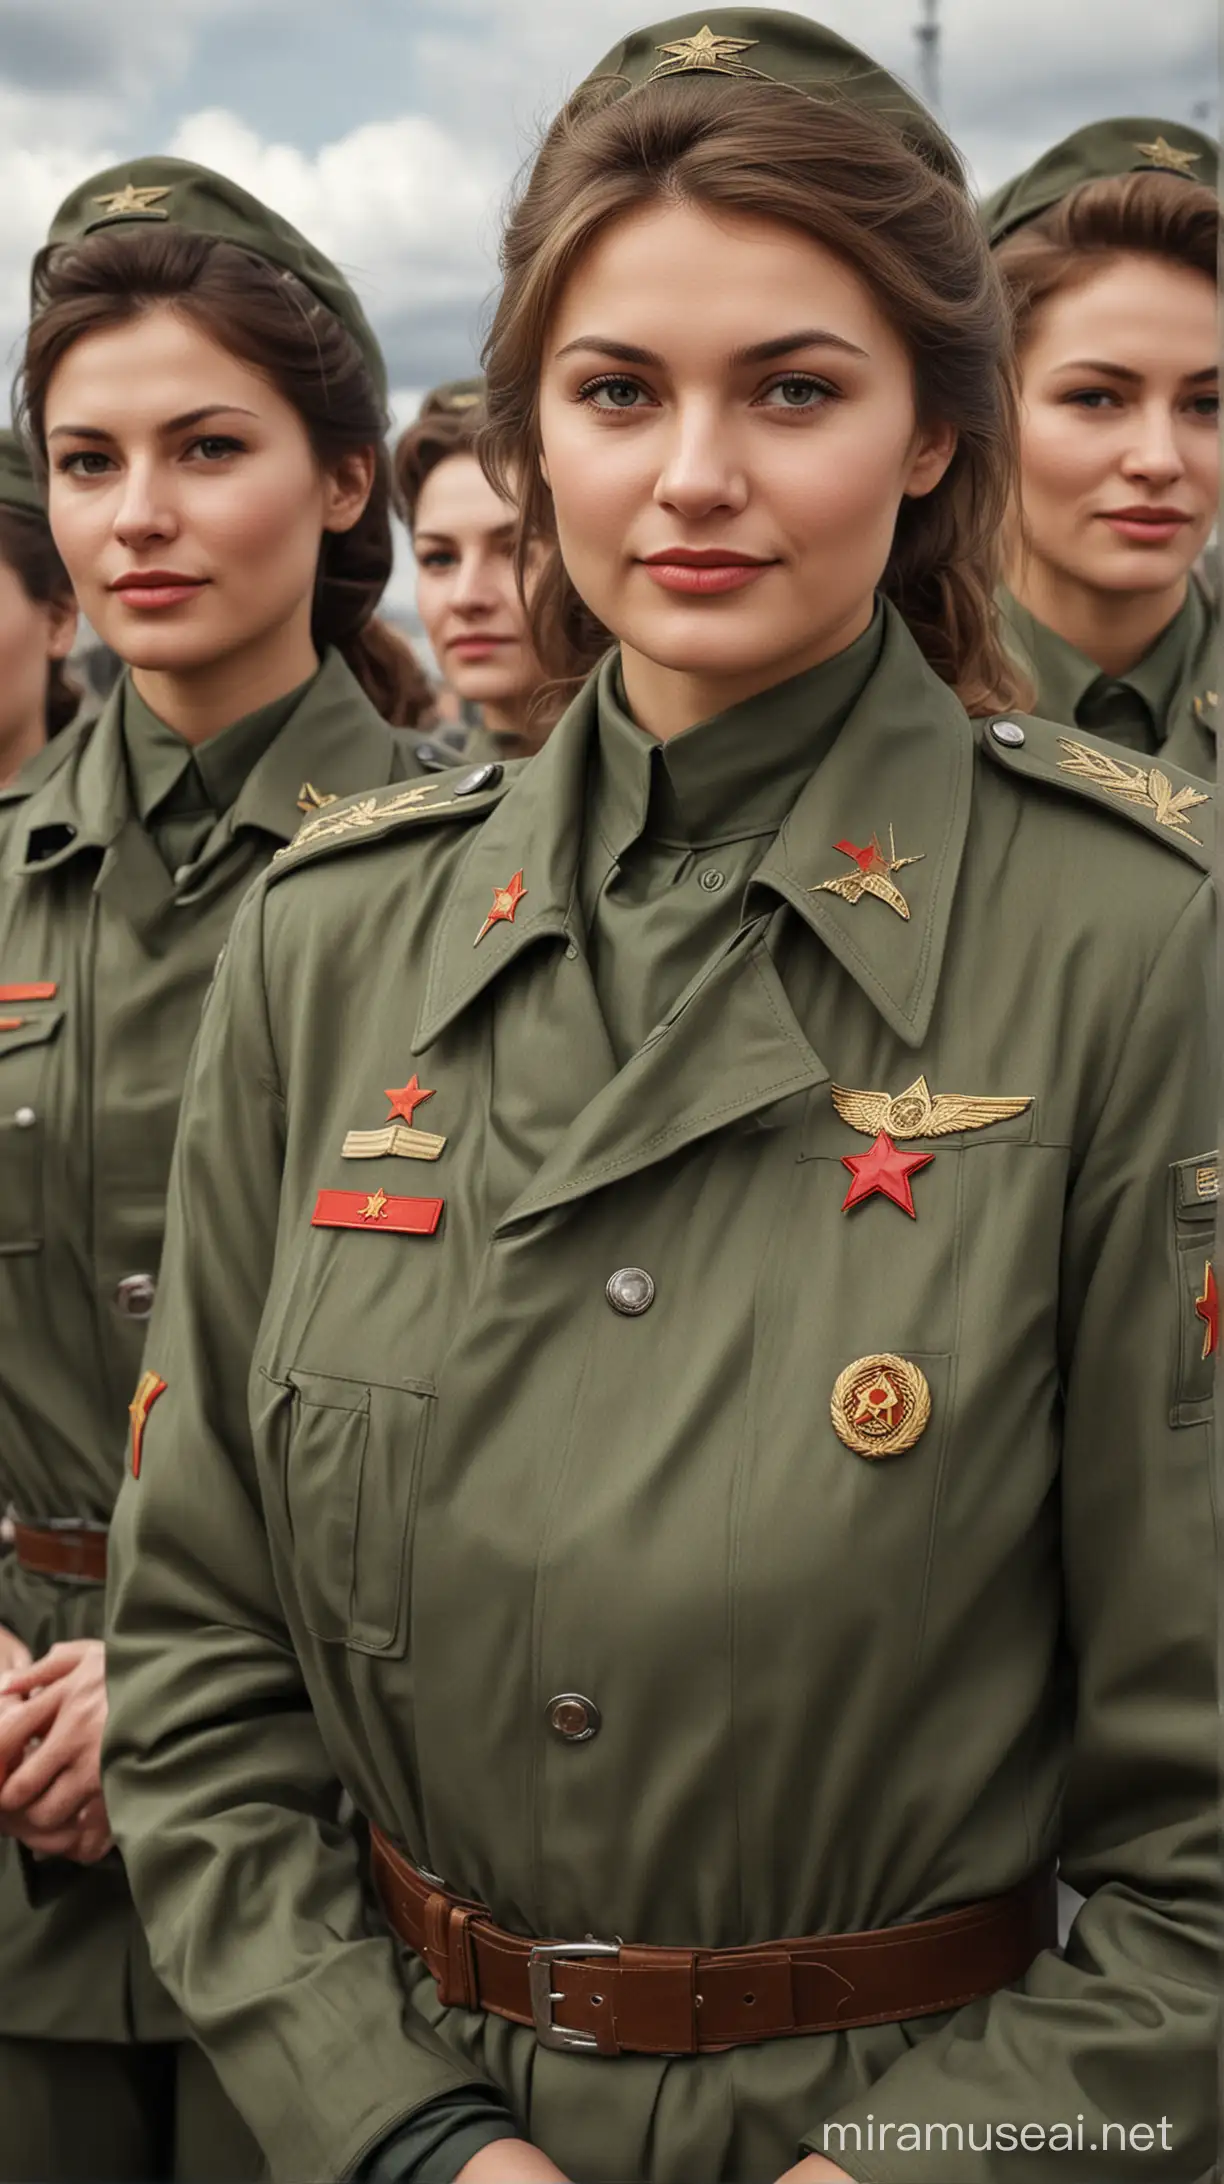 Image of Soviet officials recruiting female pilots for the all-female pilot squadron. hyper realistic